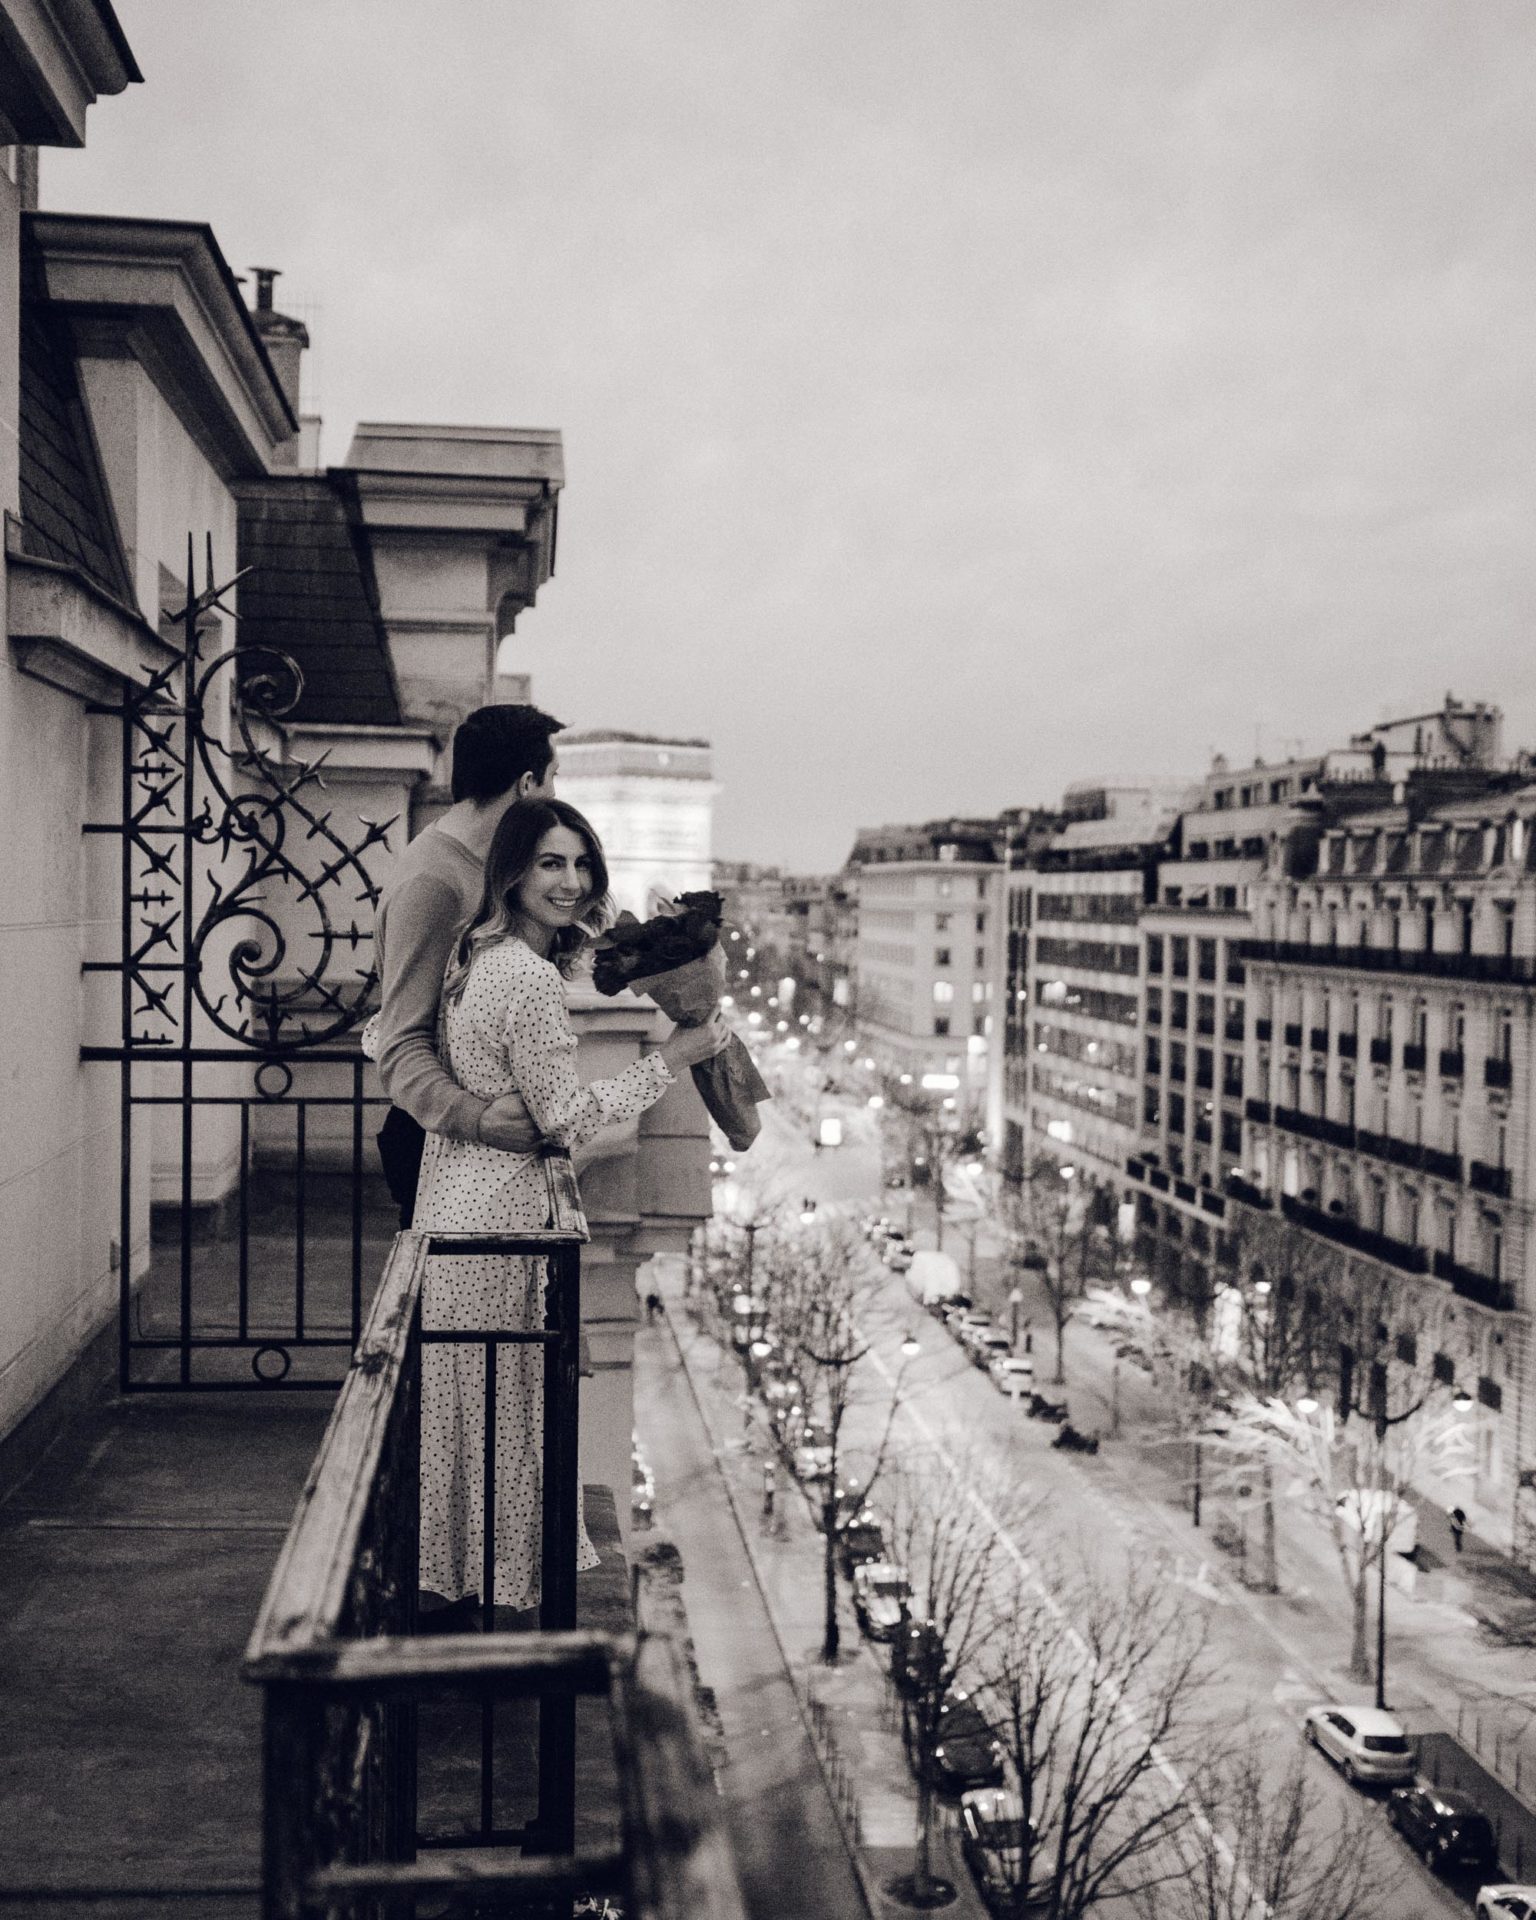 Sunset from our balcony at Le Royal Monceau Hotel in Paris for Valentine's Weekend